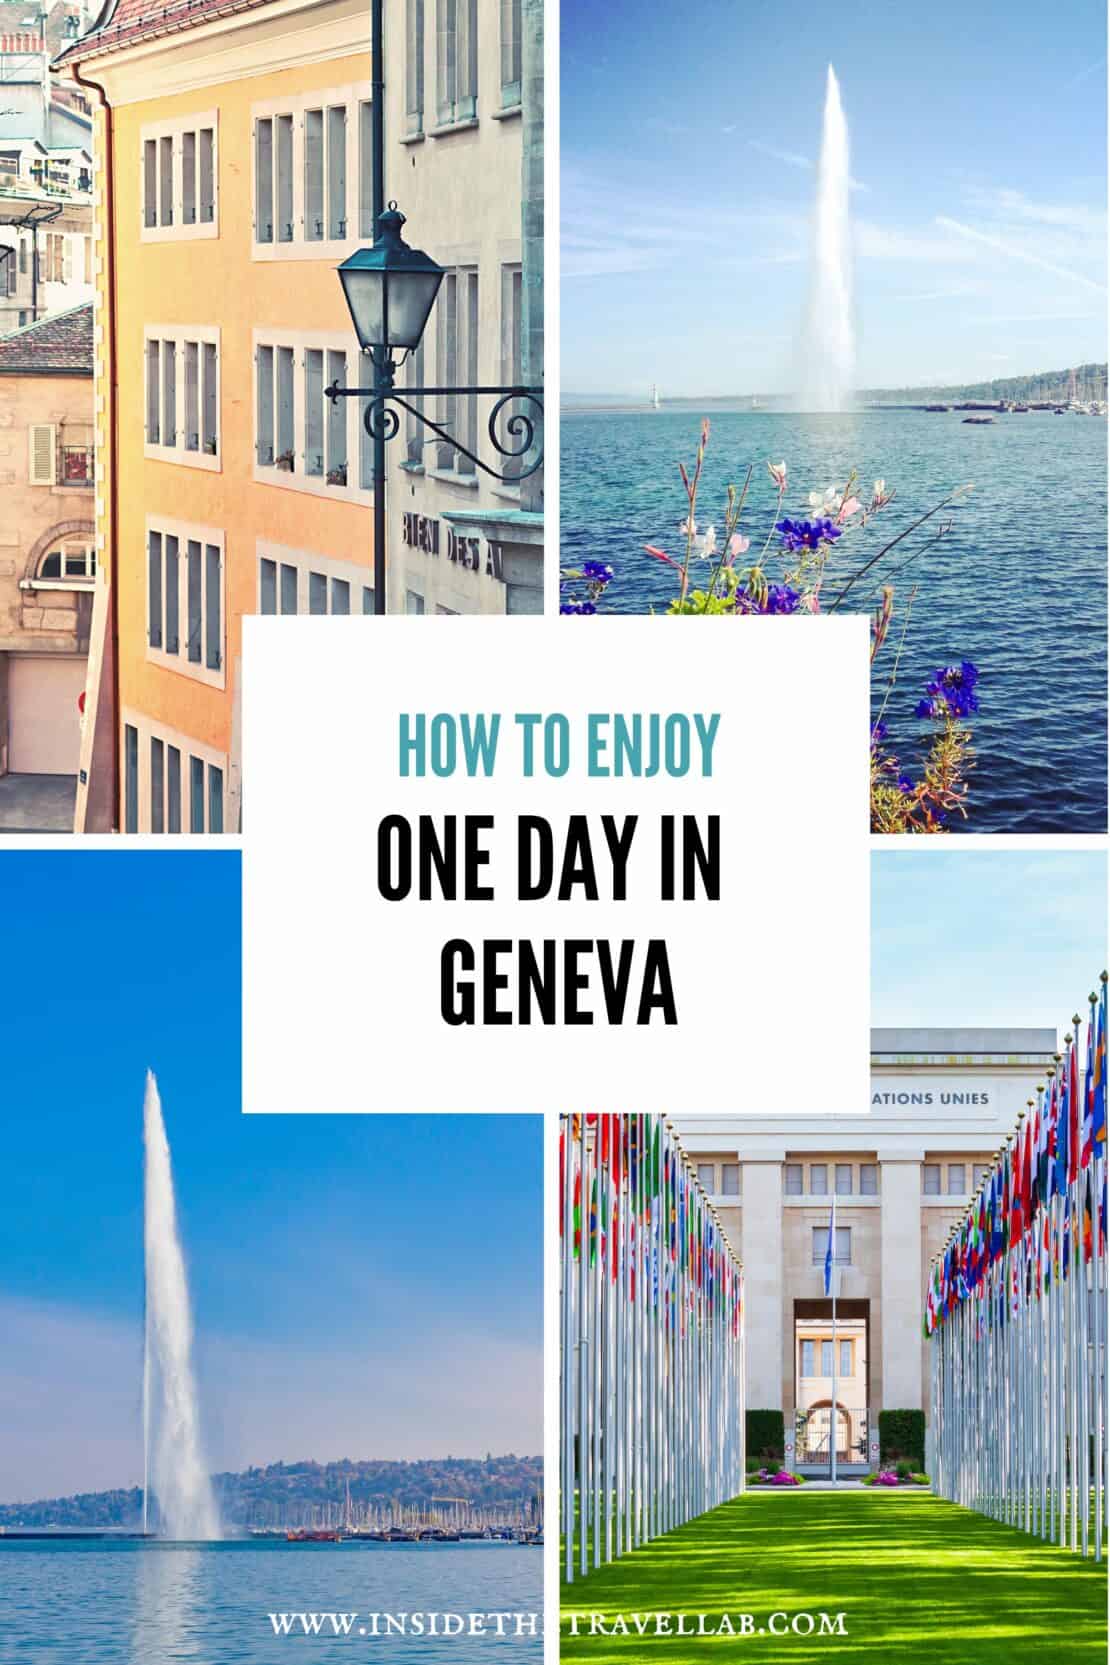 Cover image collage of what you would see during one day in Geneva